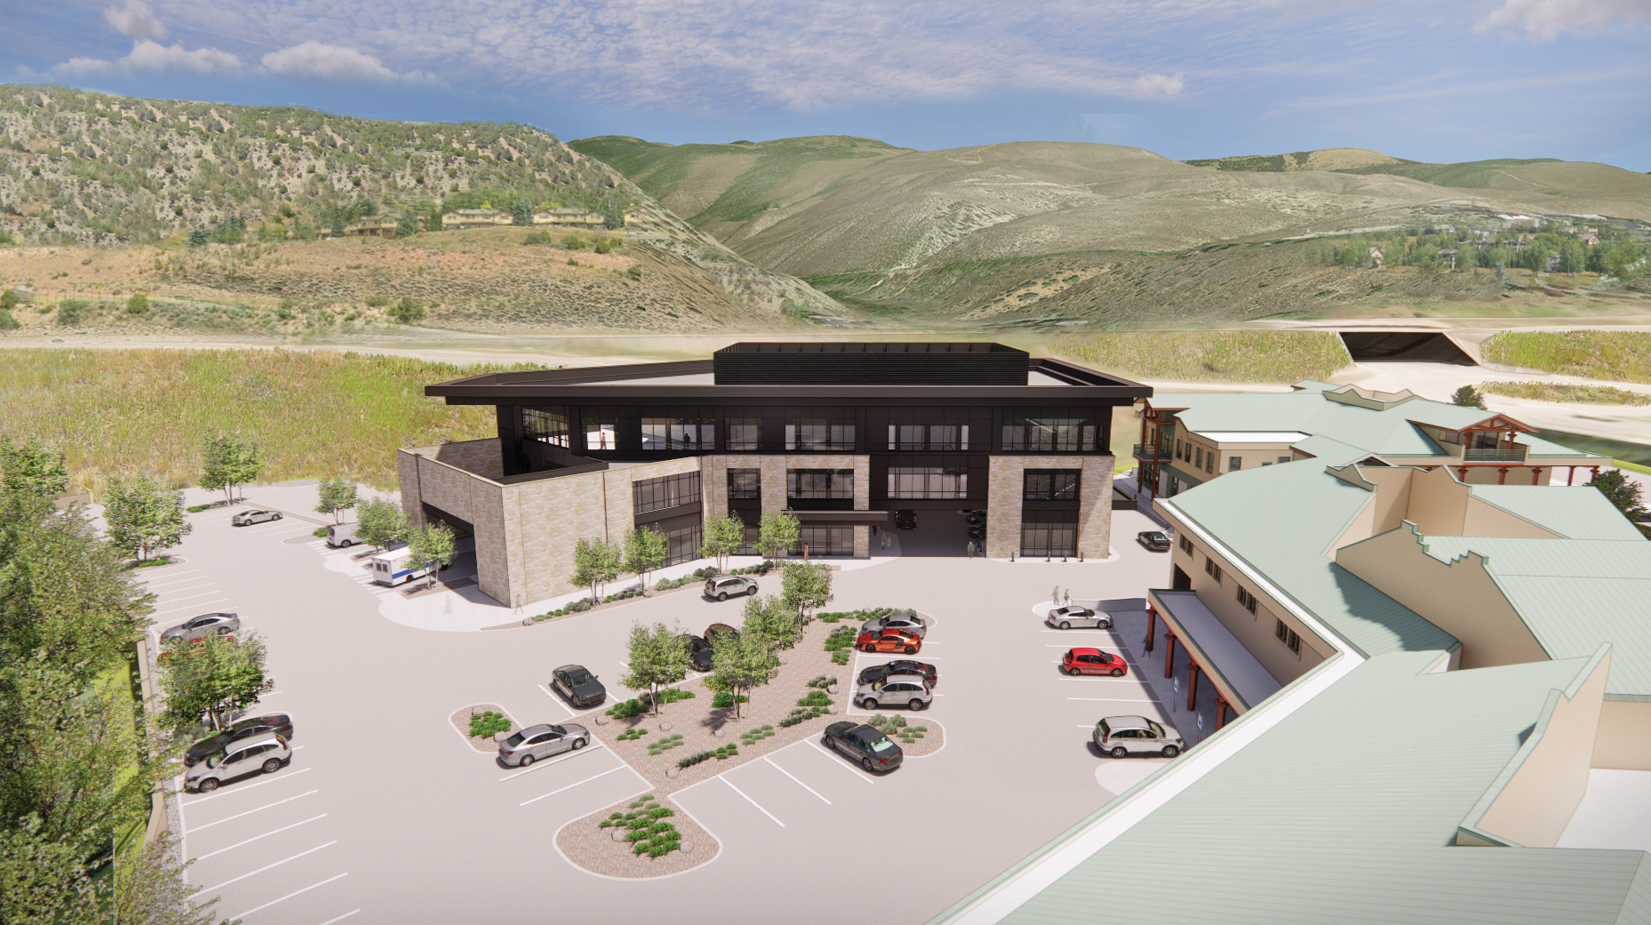 Vail Health has broken ground on the Precourt HealingCenter, a 28-bed in-patient behavioral health facility in Edwards due to open in 2025.